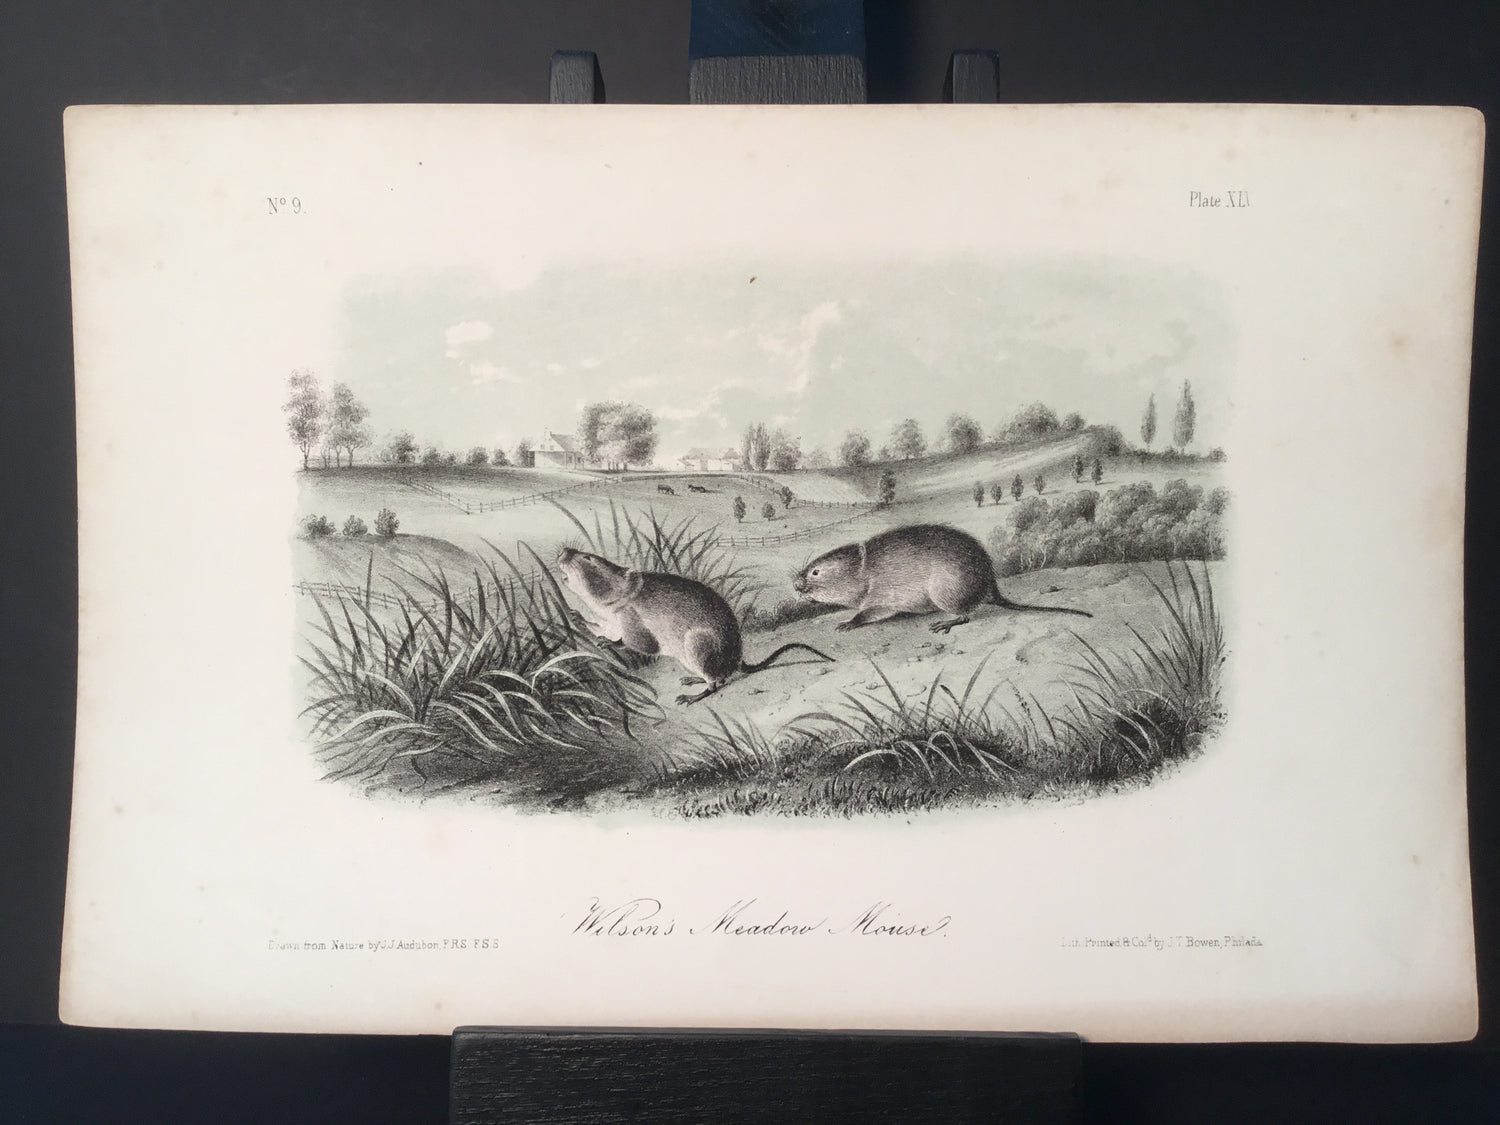 Lord-Hopkins Collection - Wilson’s Meadow Mouse